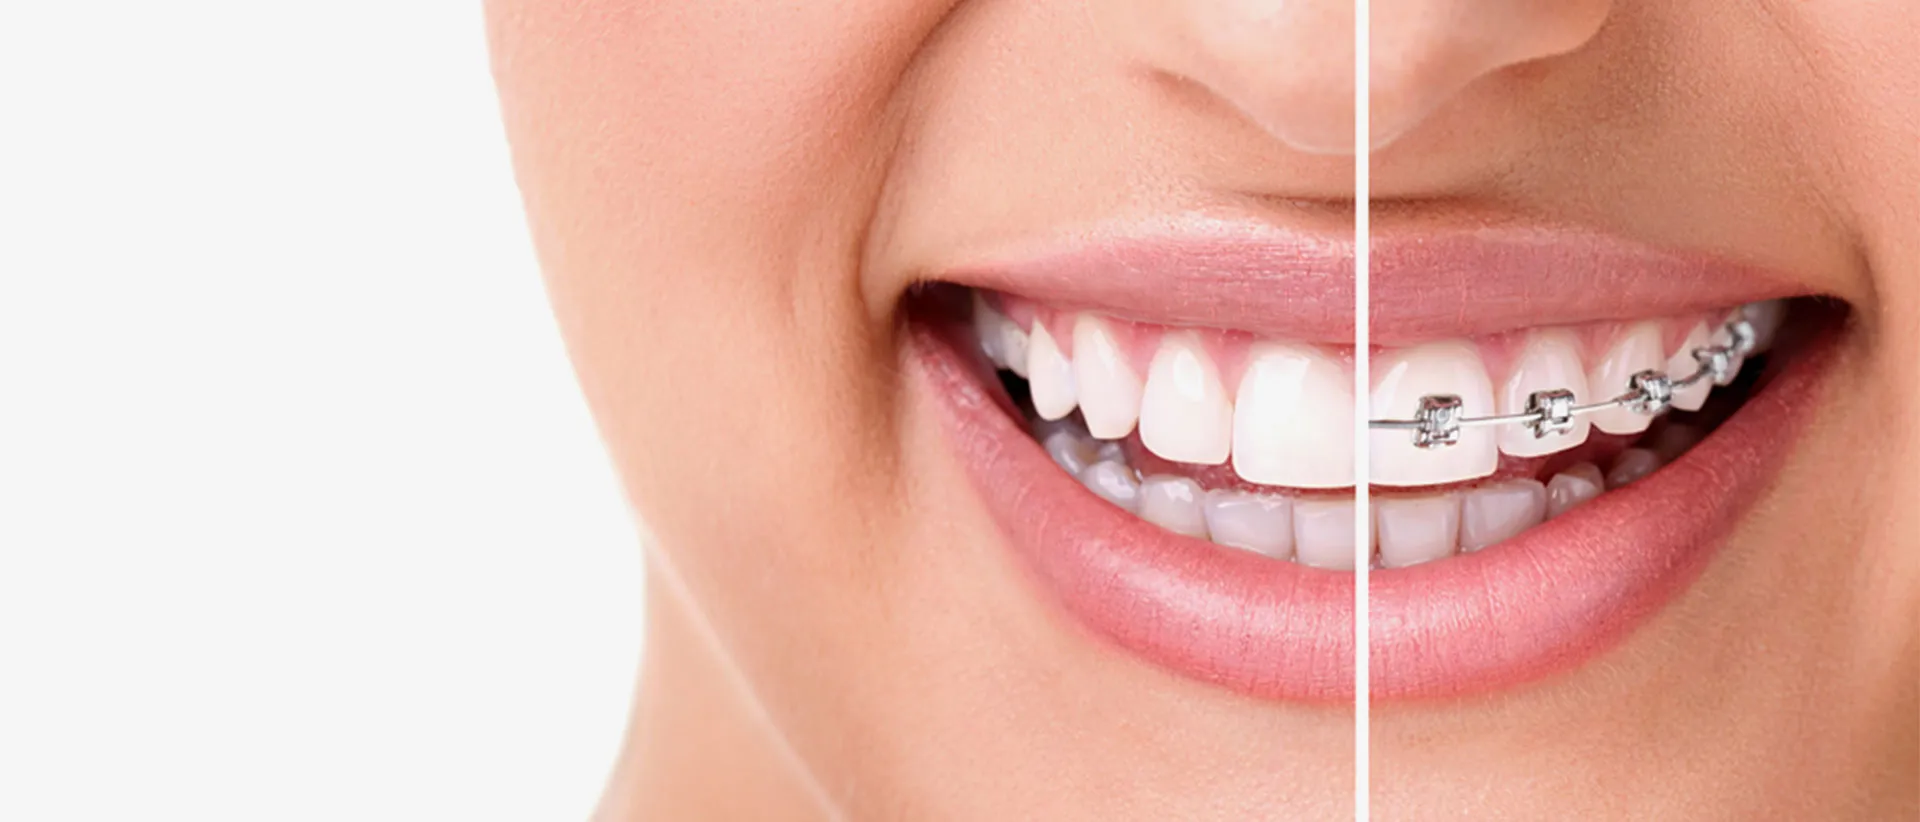 Girl with a beautiful smile - Braces help fix crooked and slanted teeth.
